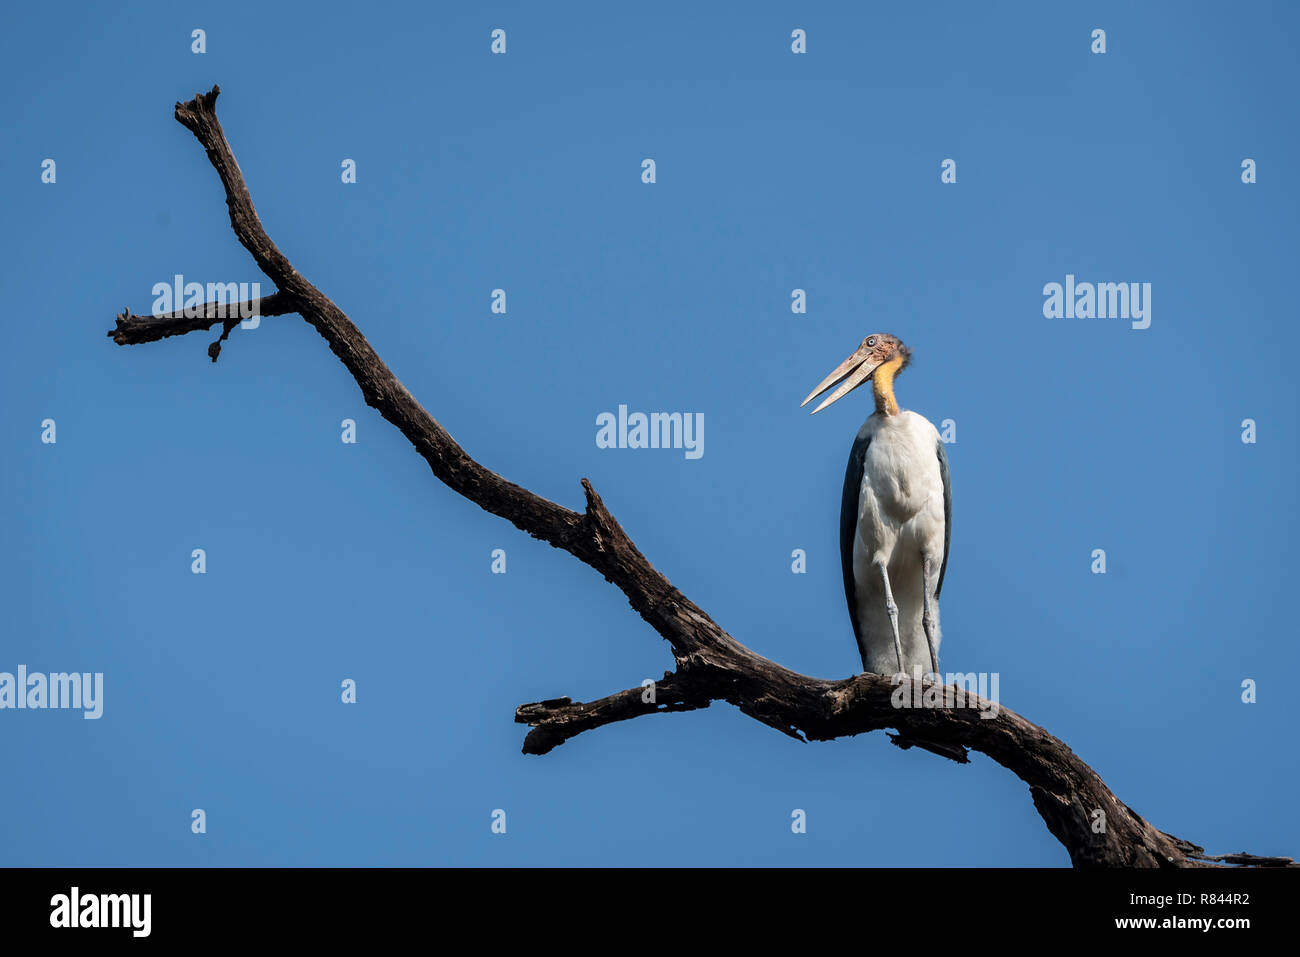 A greater adjudant resting on a branch Stock Photo